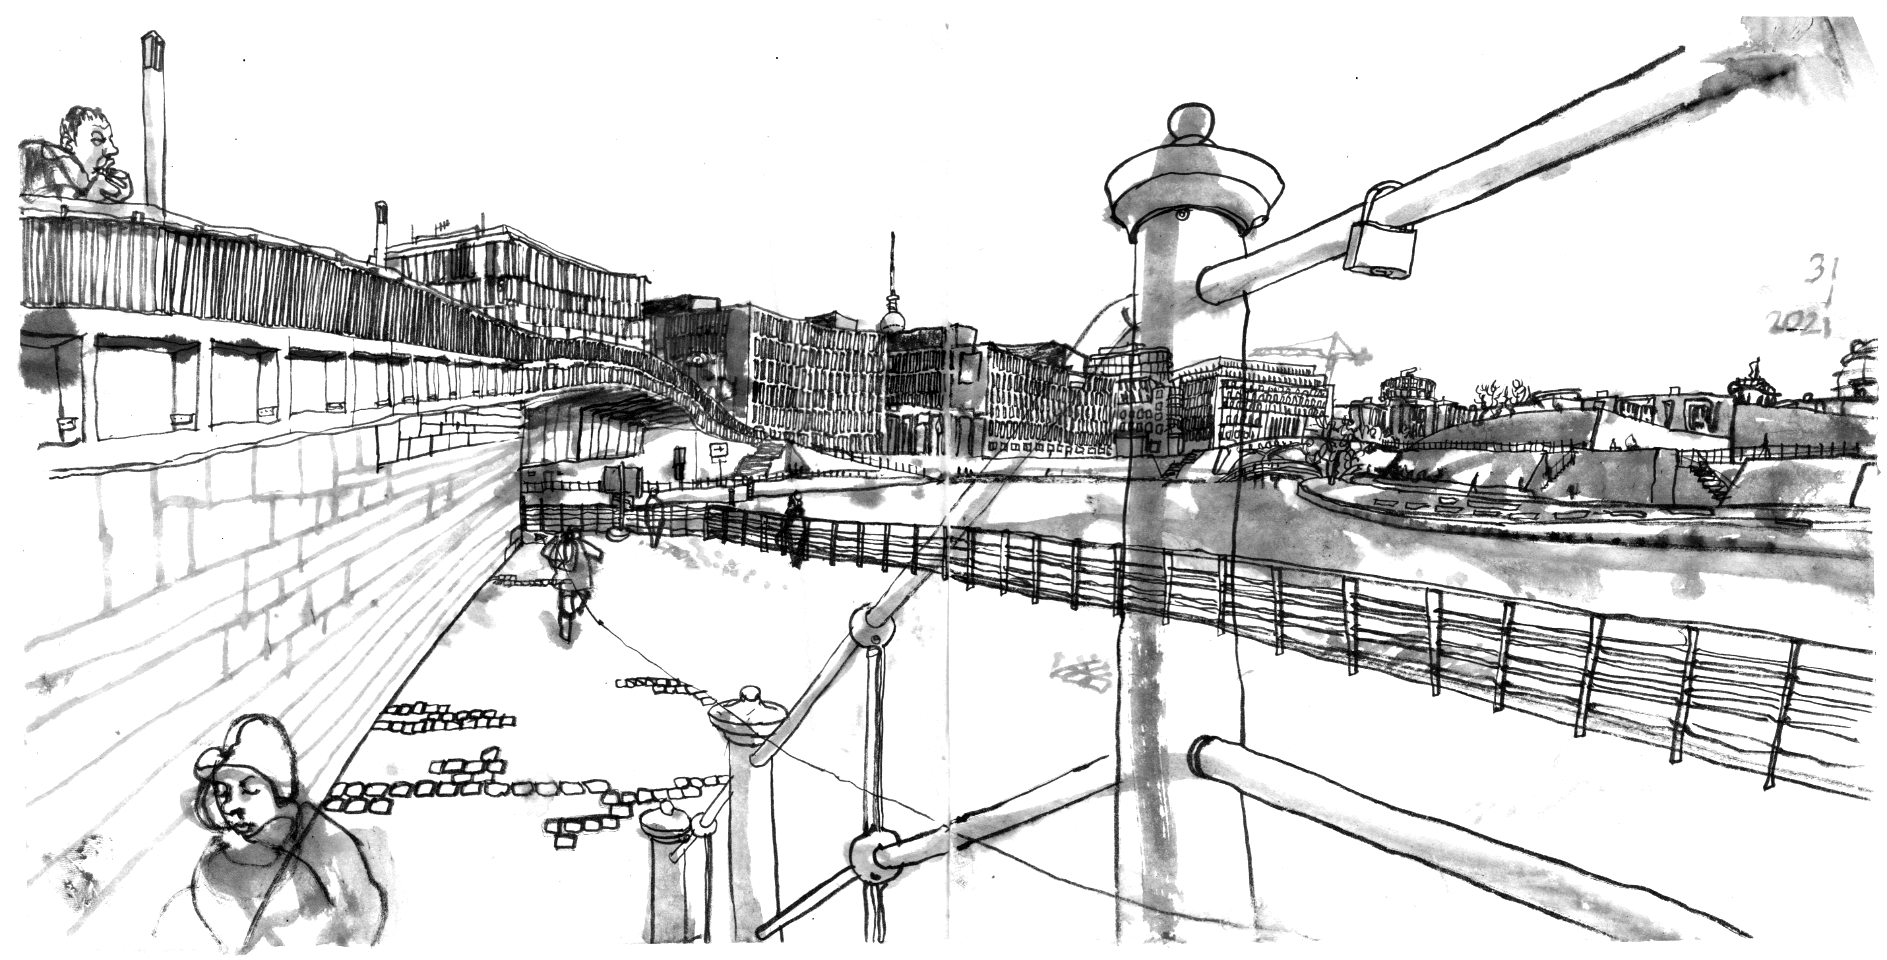 Ink drawing of a riverside, seen from the stairs that lead to walkways by the bank. To the left, the handrails of a higher level, flowing above a bridge that crosses a branch from the river. behind the bridge a modern buildings at the riverside, the river is bending to the right, on the opposite bank is another walkway by the river, on the left in the forground of the image are two figures, one coming up the stairs, another one looking over the handrail. In the front right is the handrail of the stairs, a single lock attached to it.